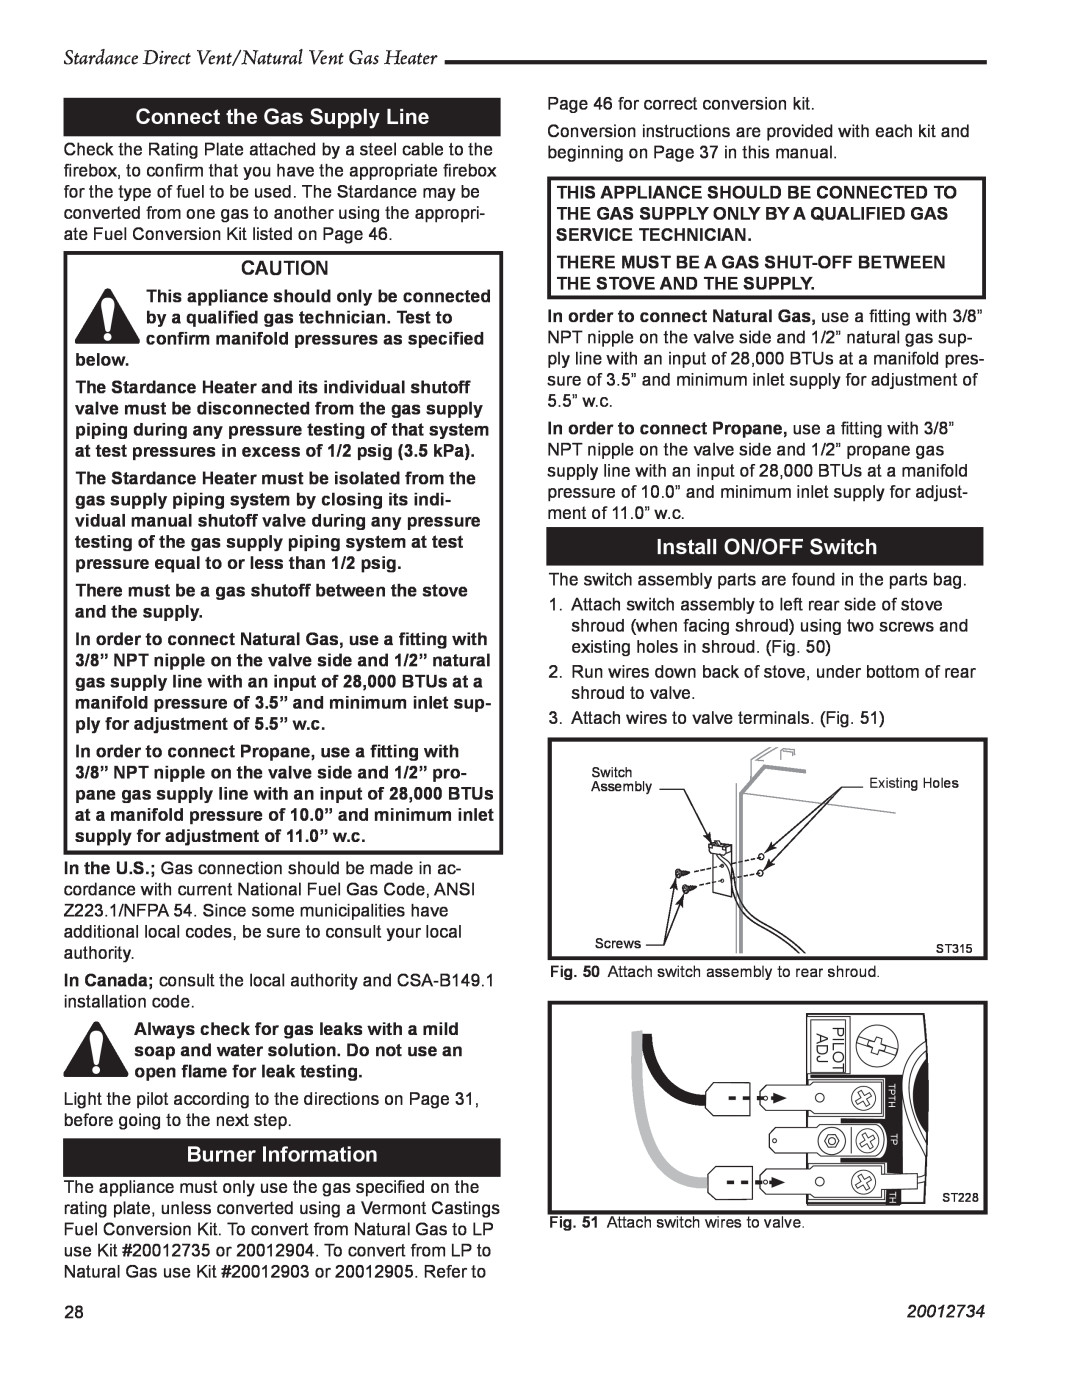 Vermont Casting SDDVT manual Connect the Gas Supply Line, Burner Information, Install ON/OFF Switch, 20012734 